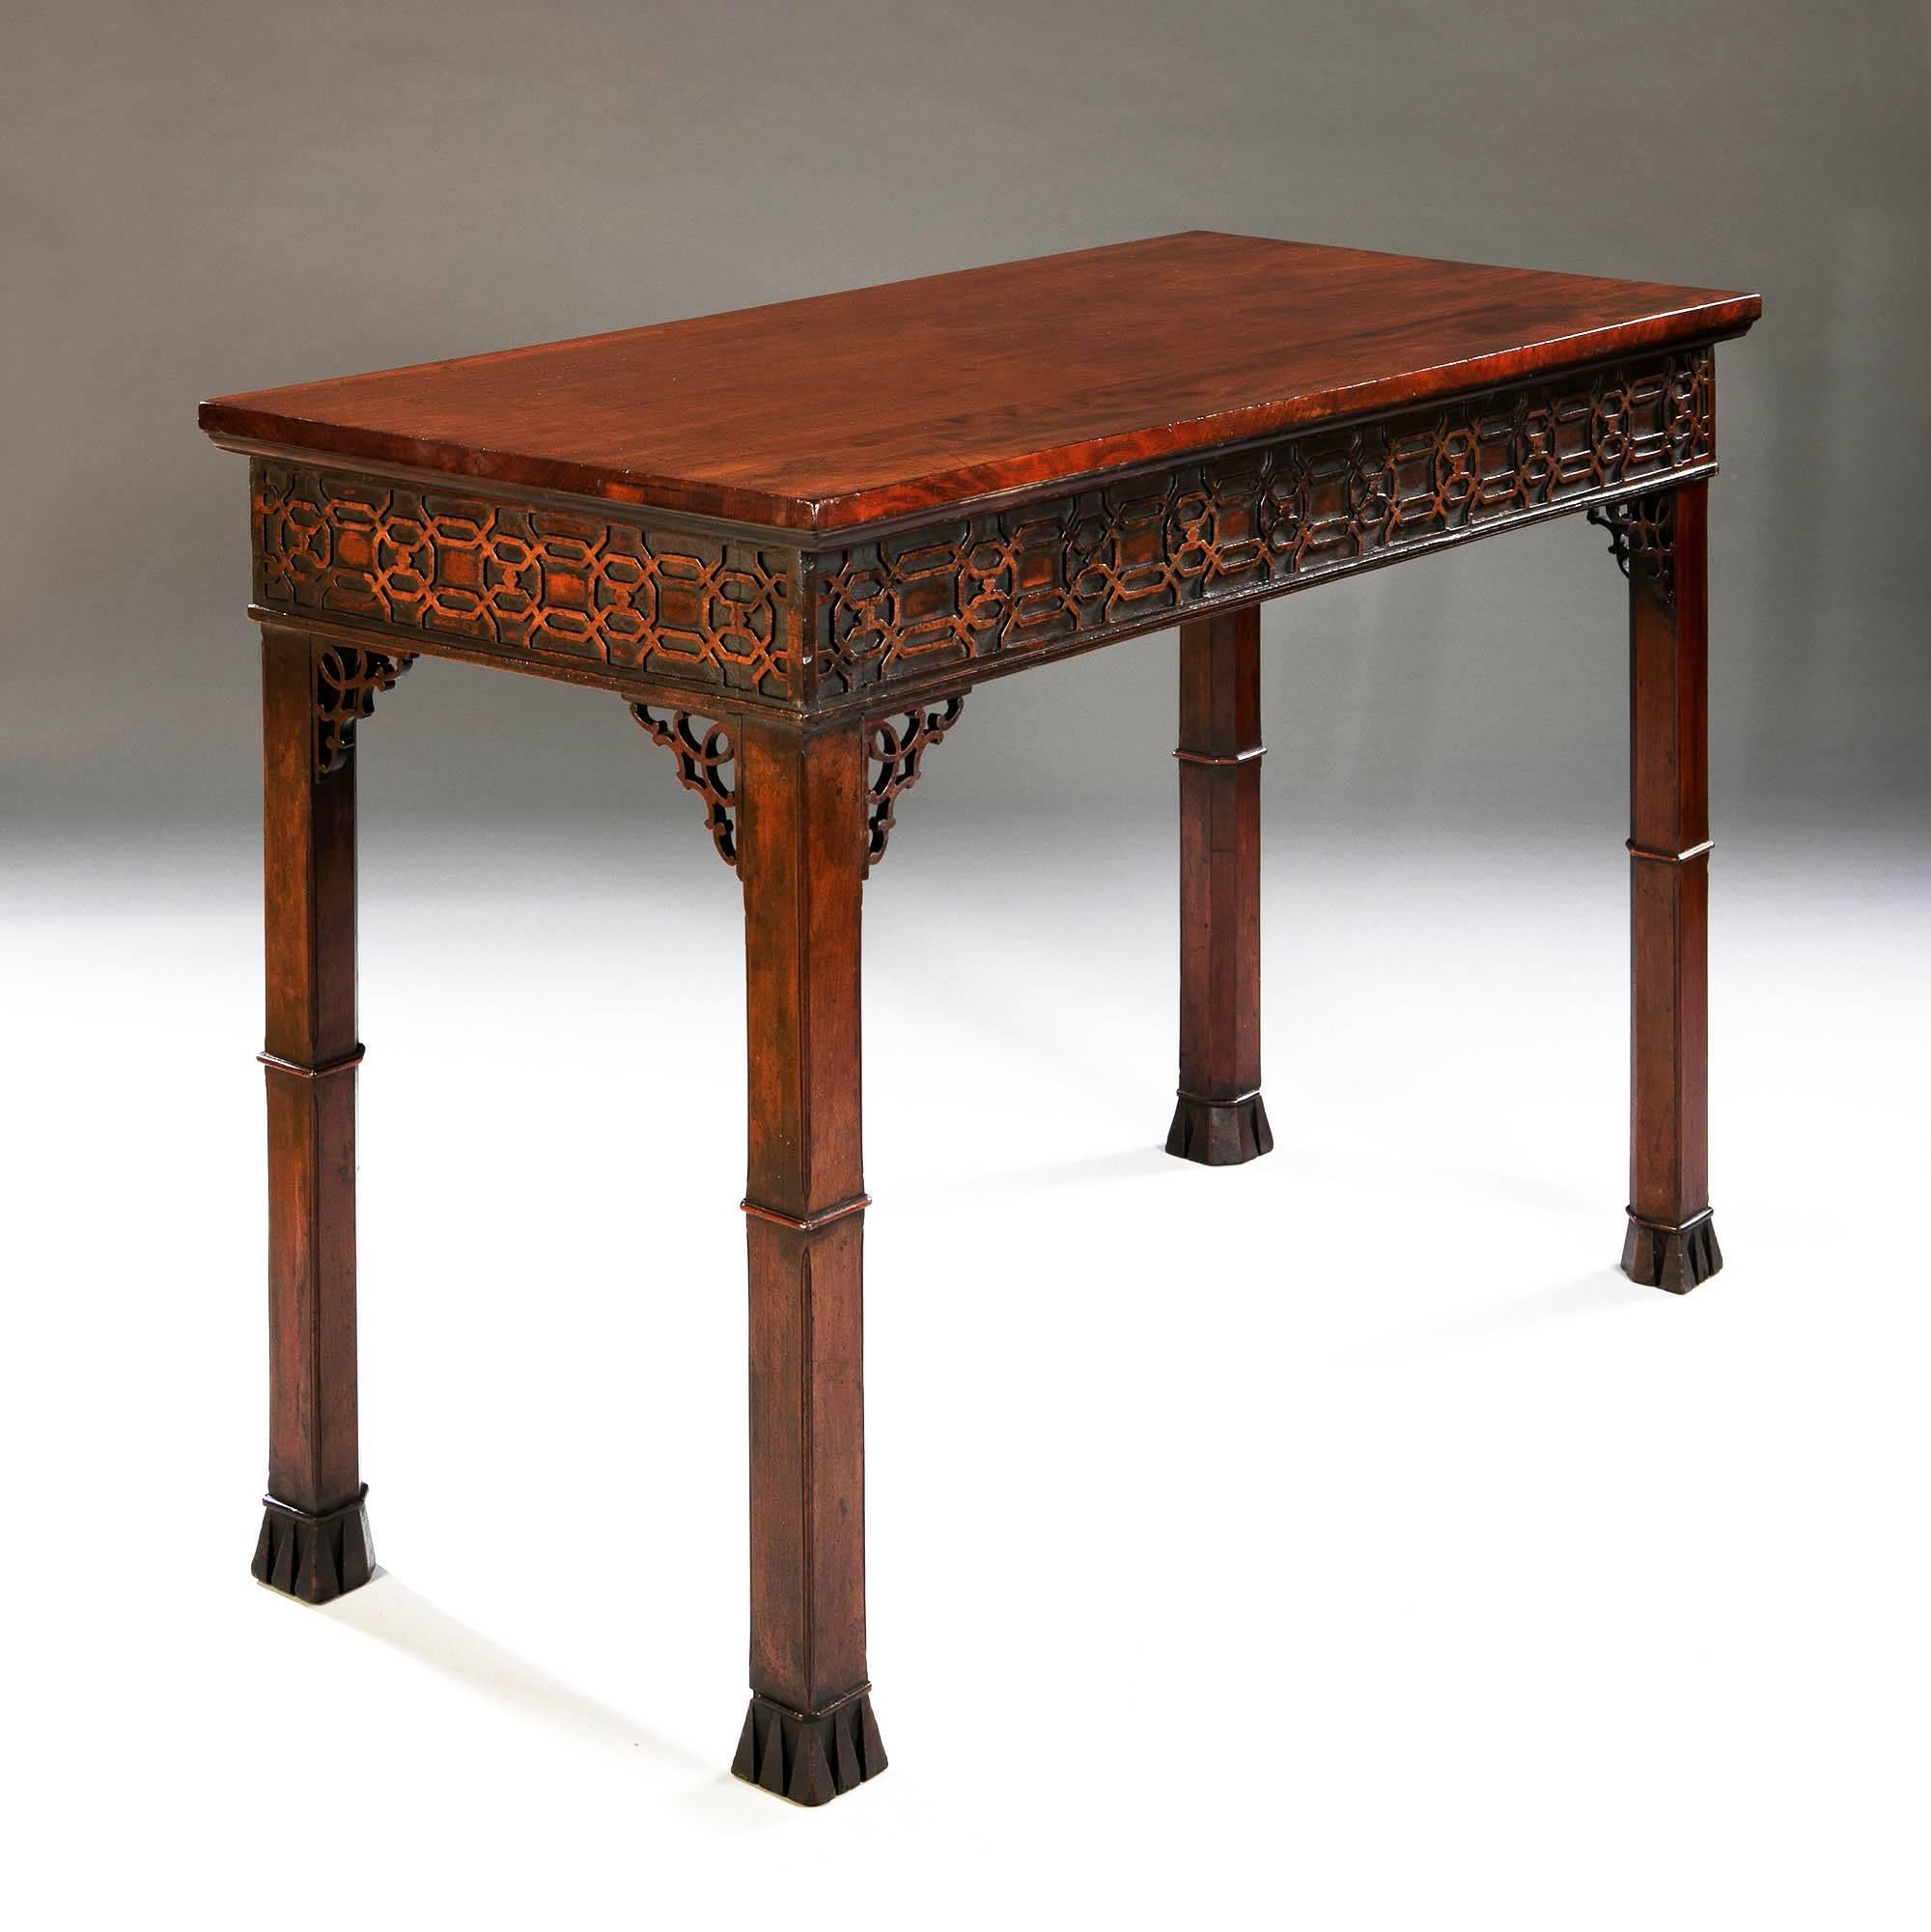 Georgian 18th Century Chippendale Centre or Serving Table In Excellent Condition In London, by appointment only